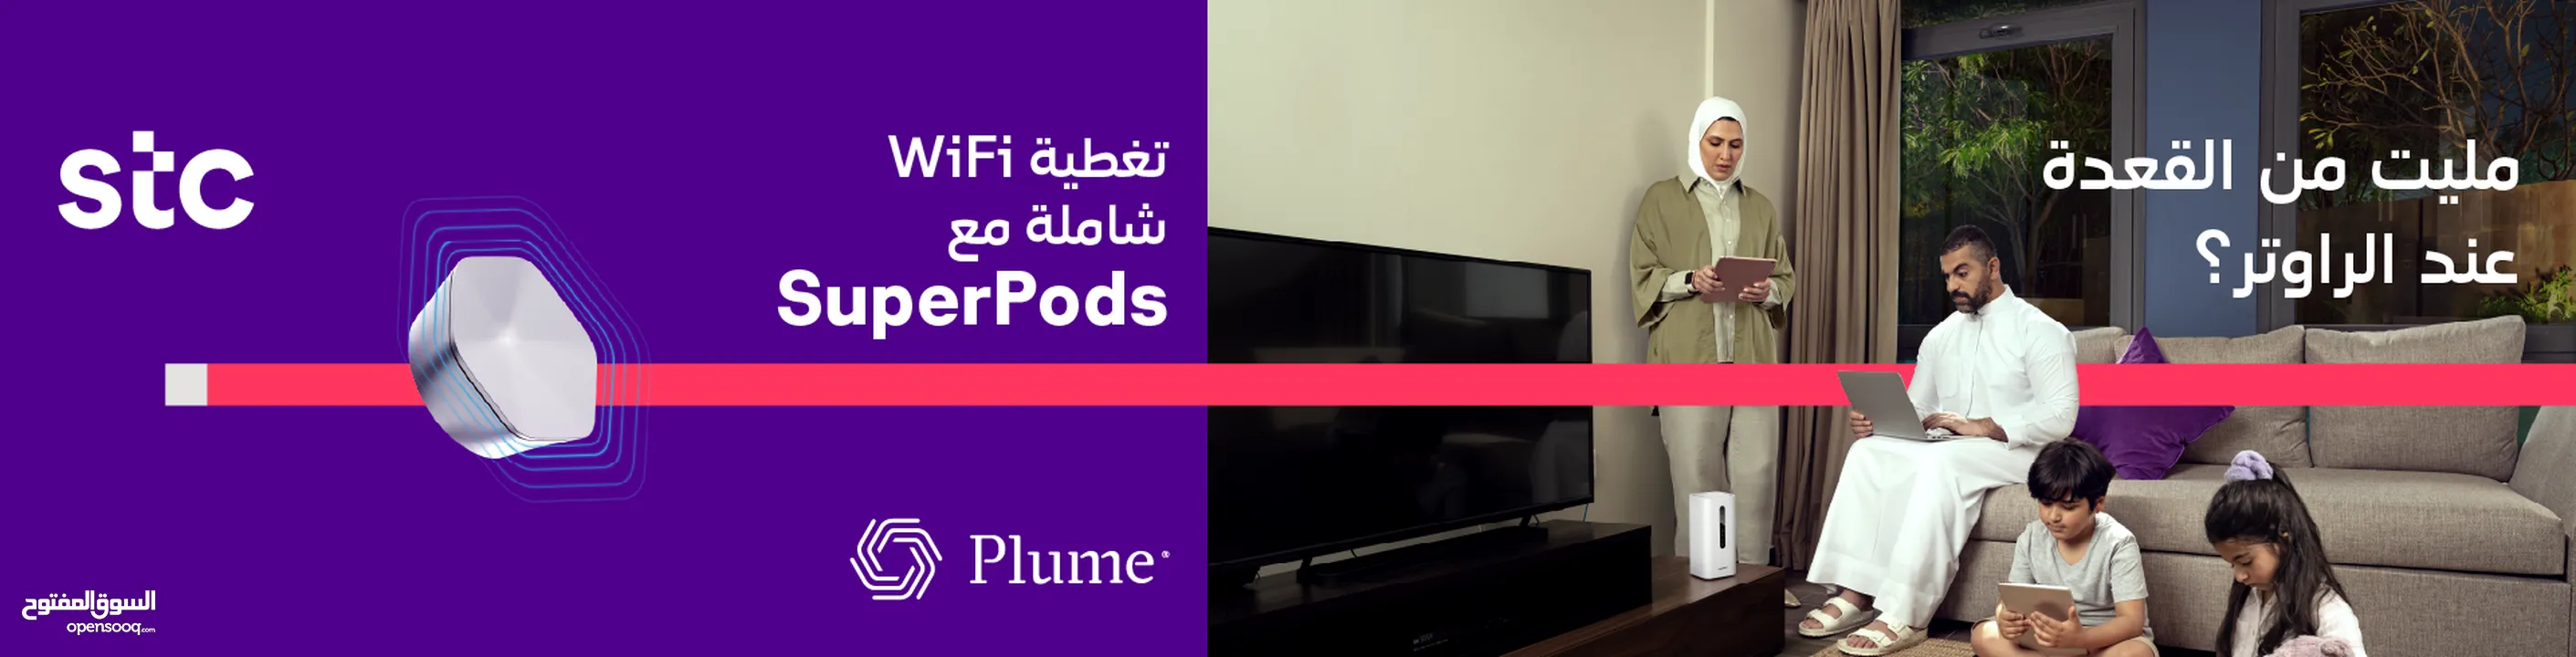 Wi-Fi with Plume's SuperPods